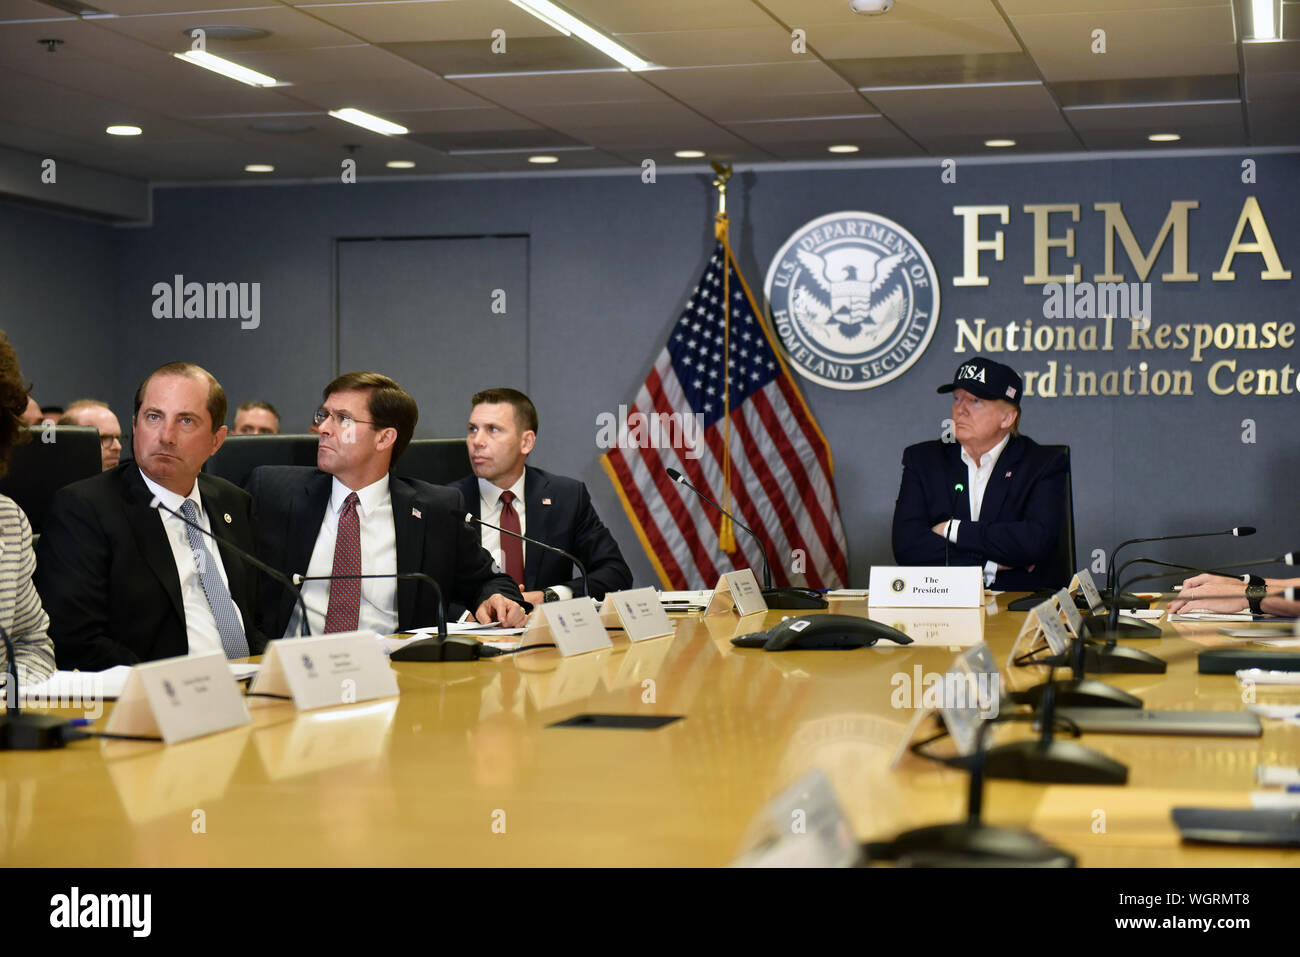 President Donald Trump leads a Hurricane Dorian briefing at the Federal Emergency Management Agency, Washington, D.C., Sept. 1, 2019. (U.S. Army National Guard photo by Sgt. 1st Class Jim Greenhill) Stock Photo